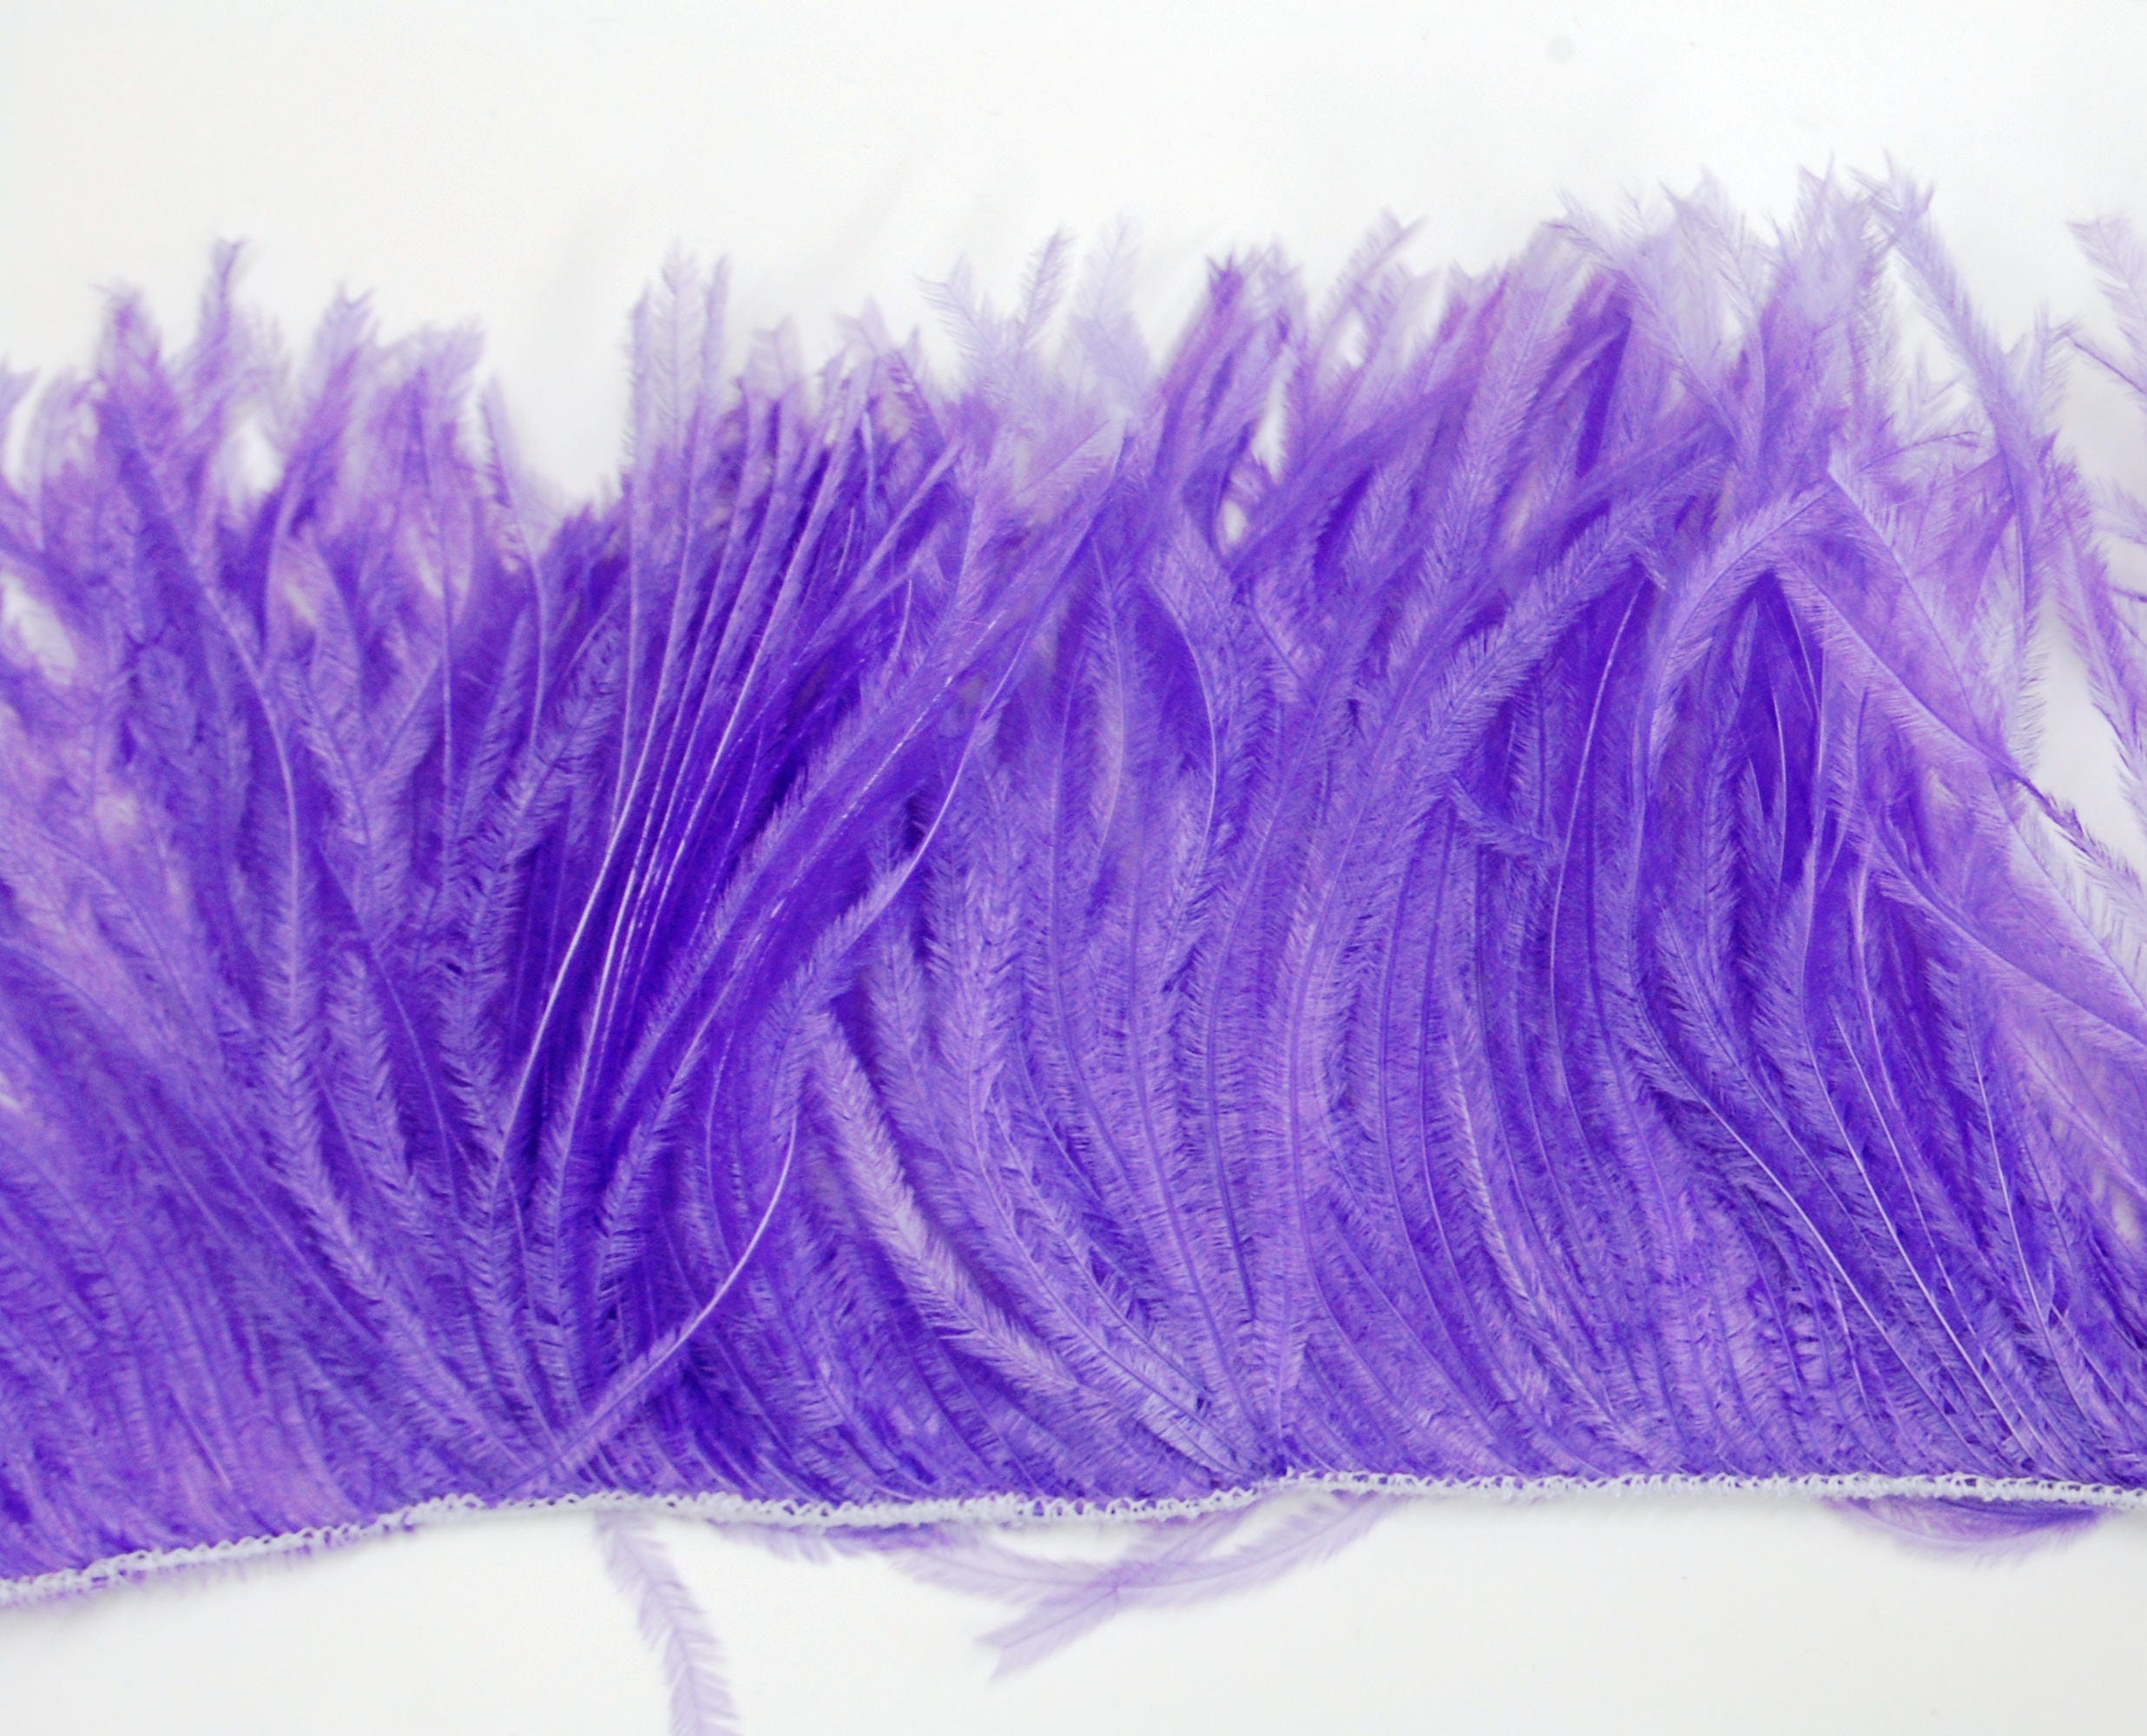 1 Pack - Lilac Turkey Marabou Short Down Fluff Loose Feathers 0.10 Oz.